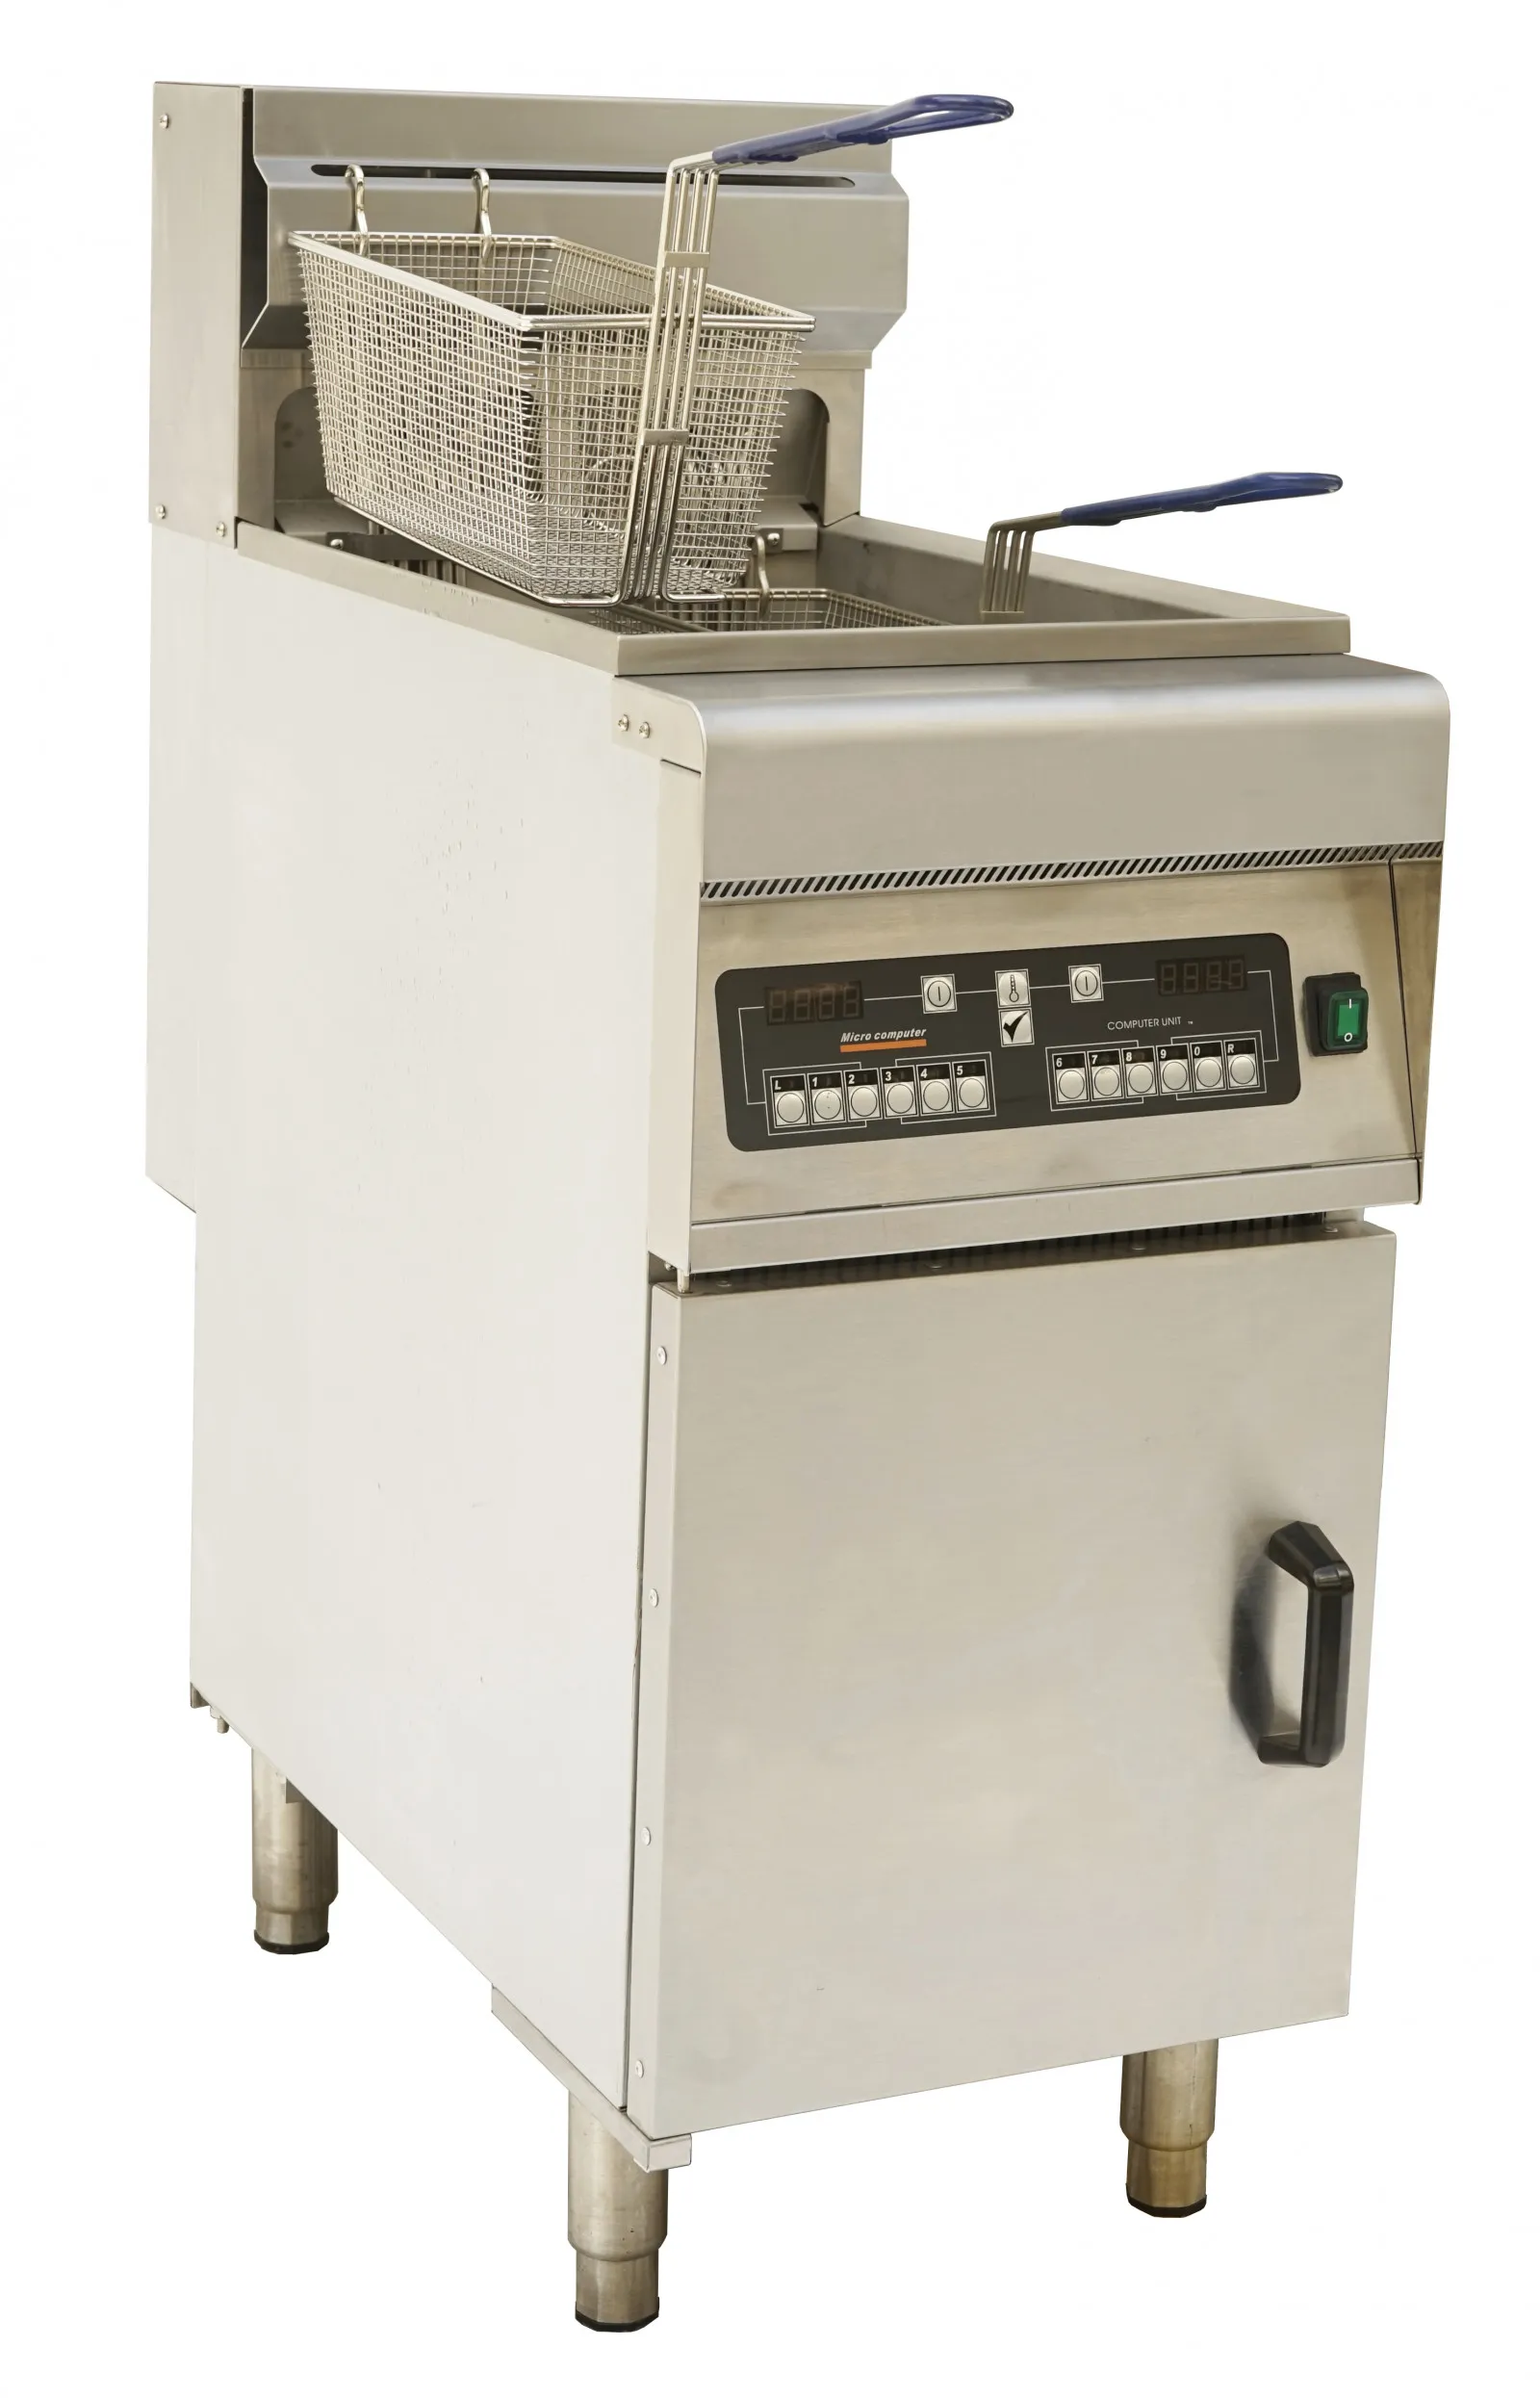 Chefsrange DF28LD - 28 Ltr Single Tank Electric Fryer With Computer Control